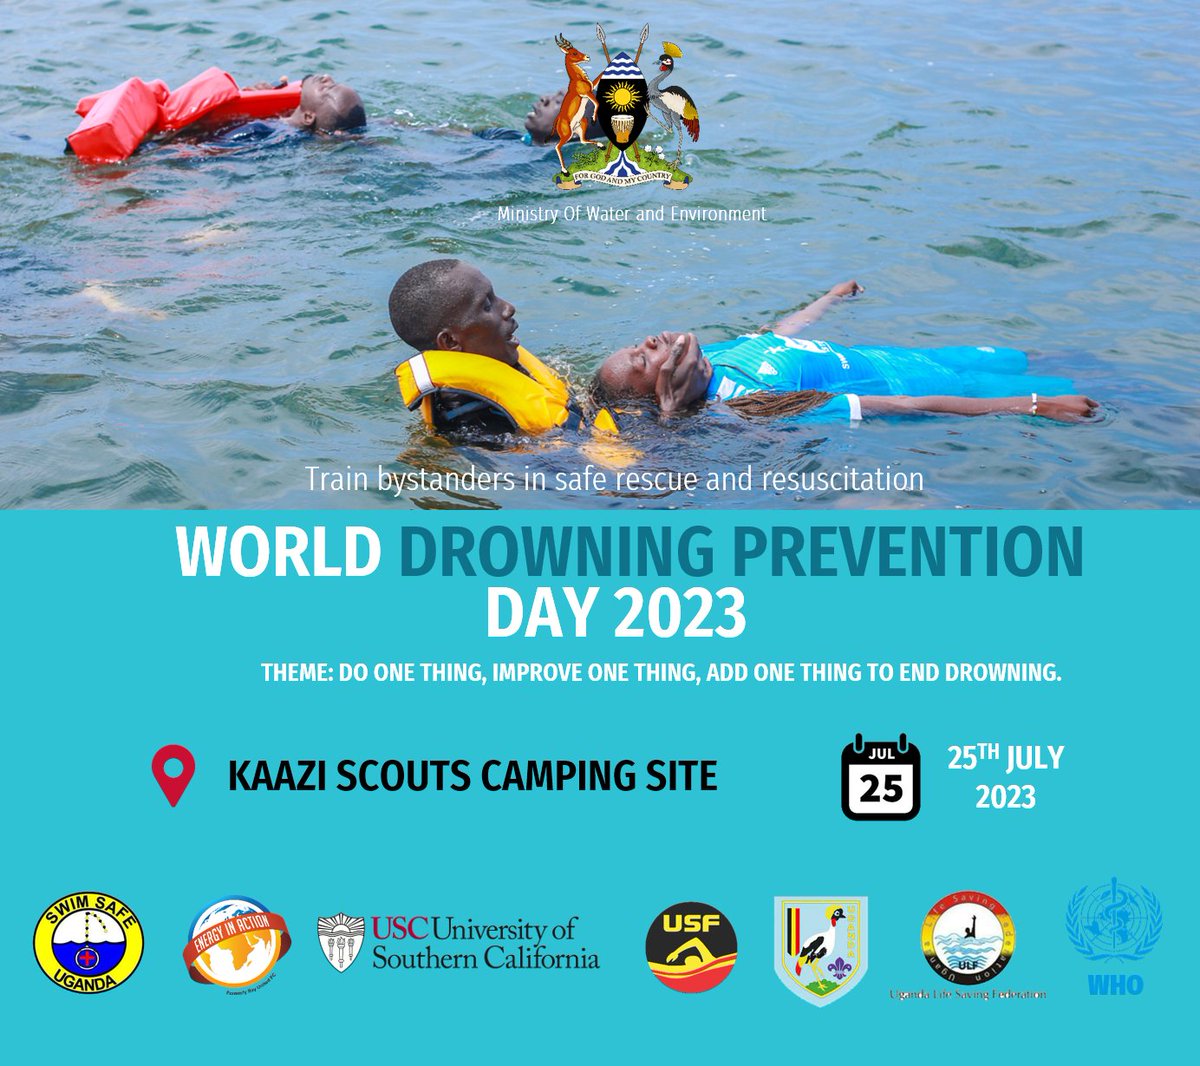 “Every life lost to drowning in Uganda is preventable.” 

On the 25th July, the World’s Drowning Prevention Day let’s amplify our efforts to implement water safety programs and save many lives 🍃🌍.
#Wdpd #WdpdUG2023
#Drowningprevention .